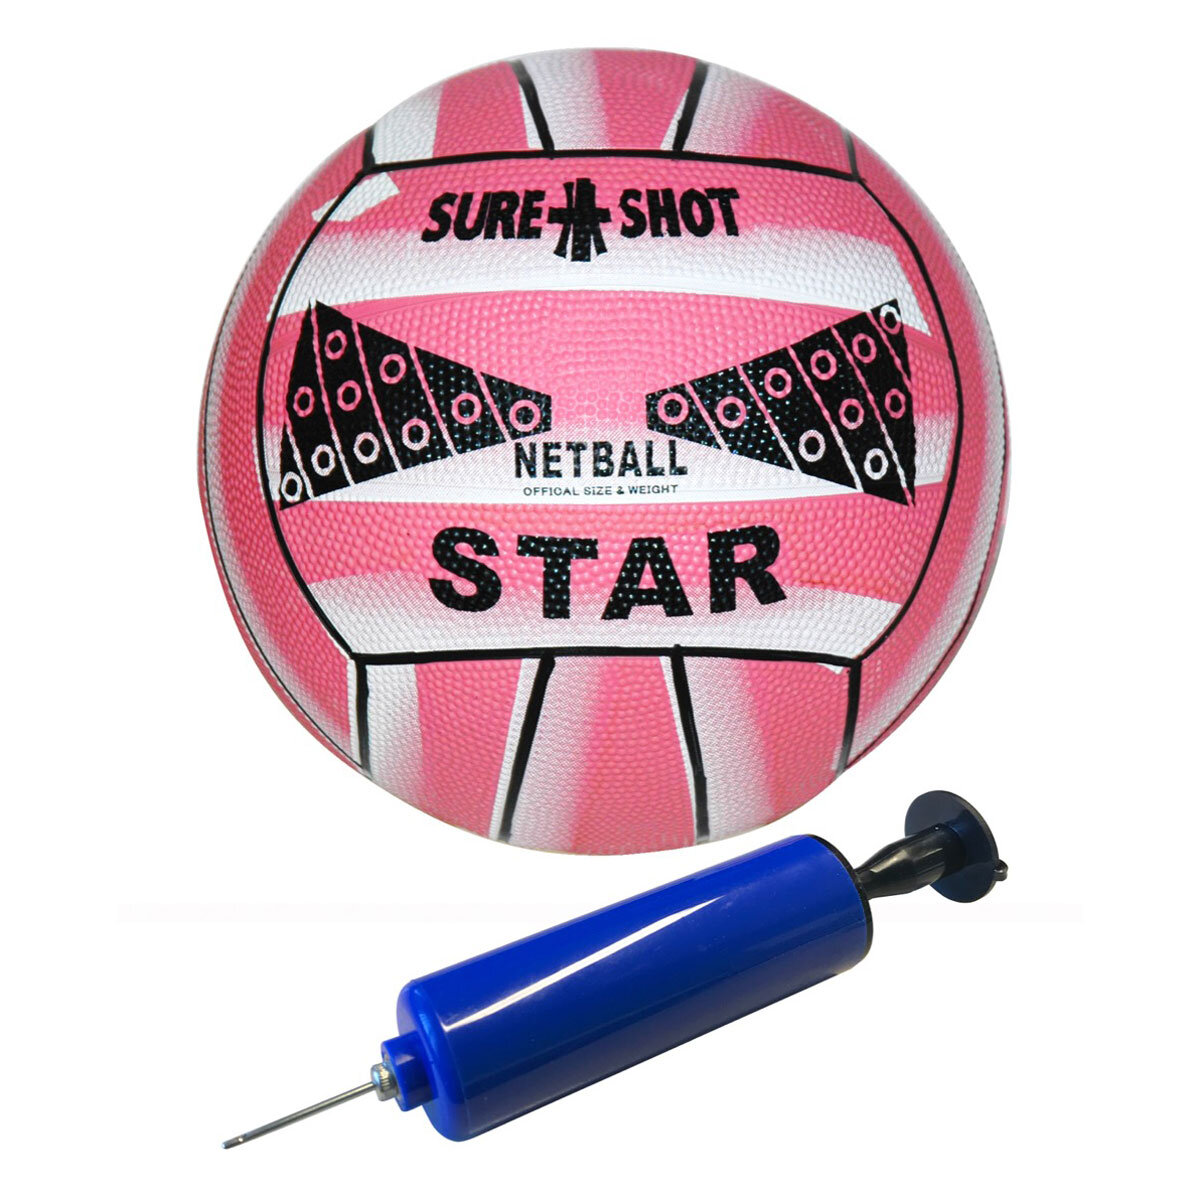 Sure Shot 10ft (3.05 m) Easistore Netball Goal in Black/Red with Padding